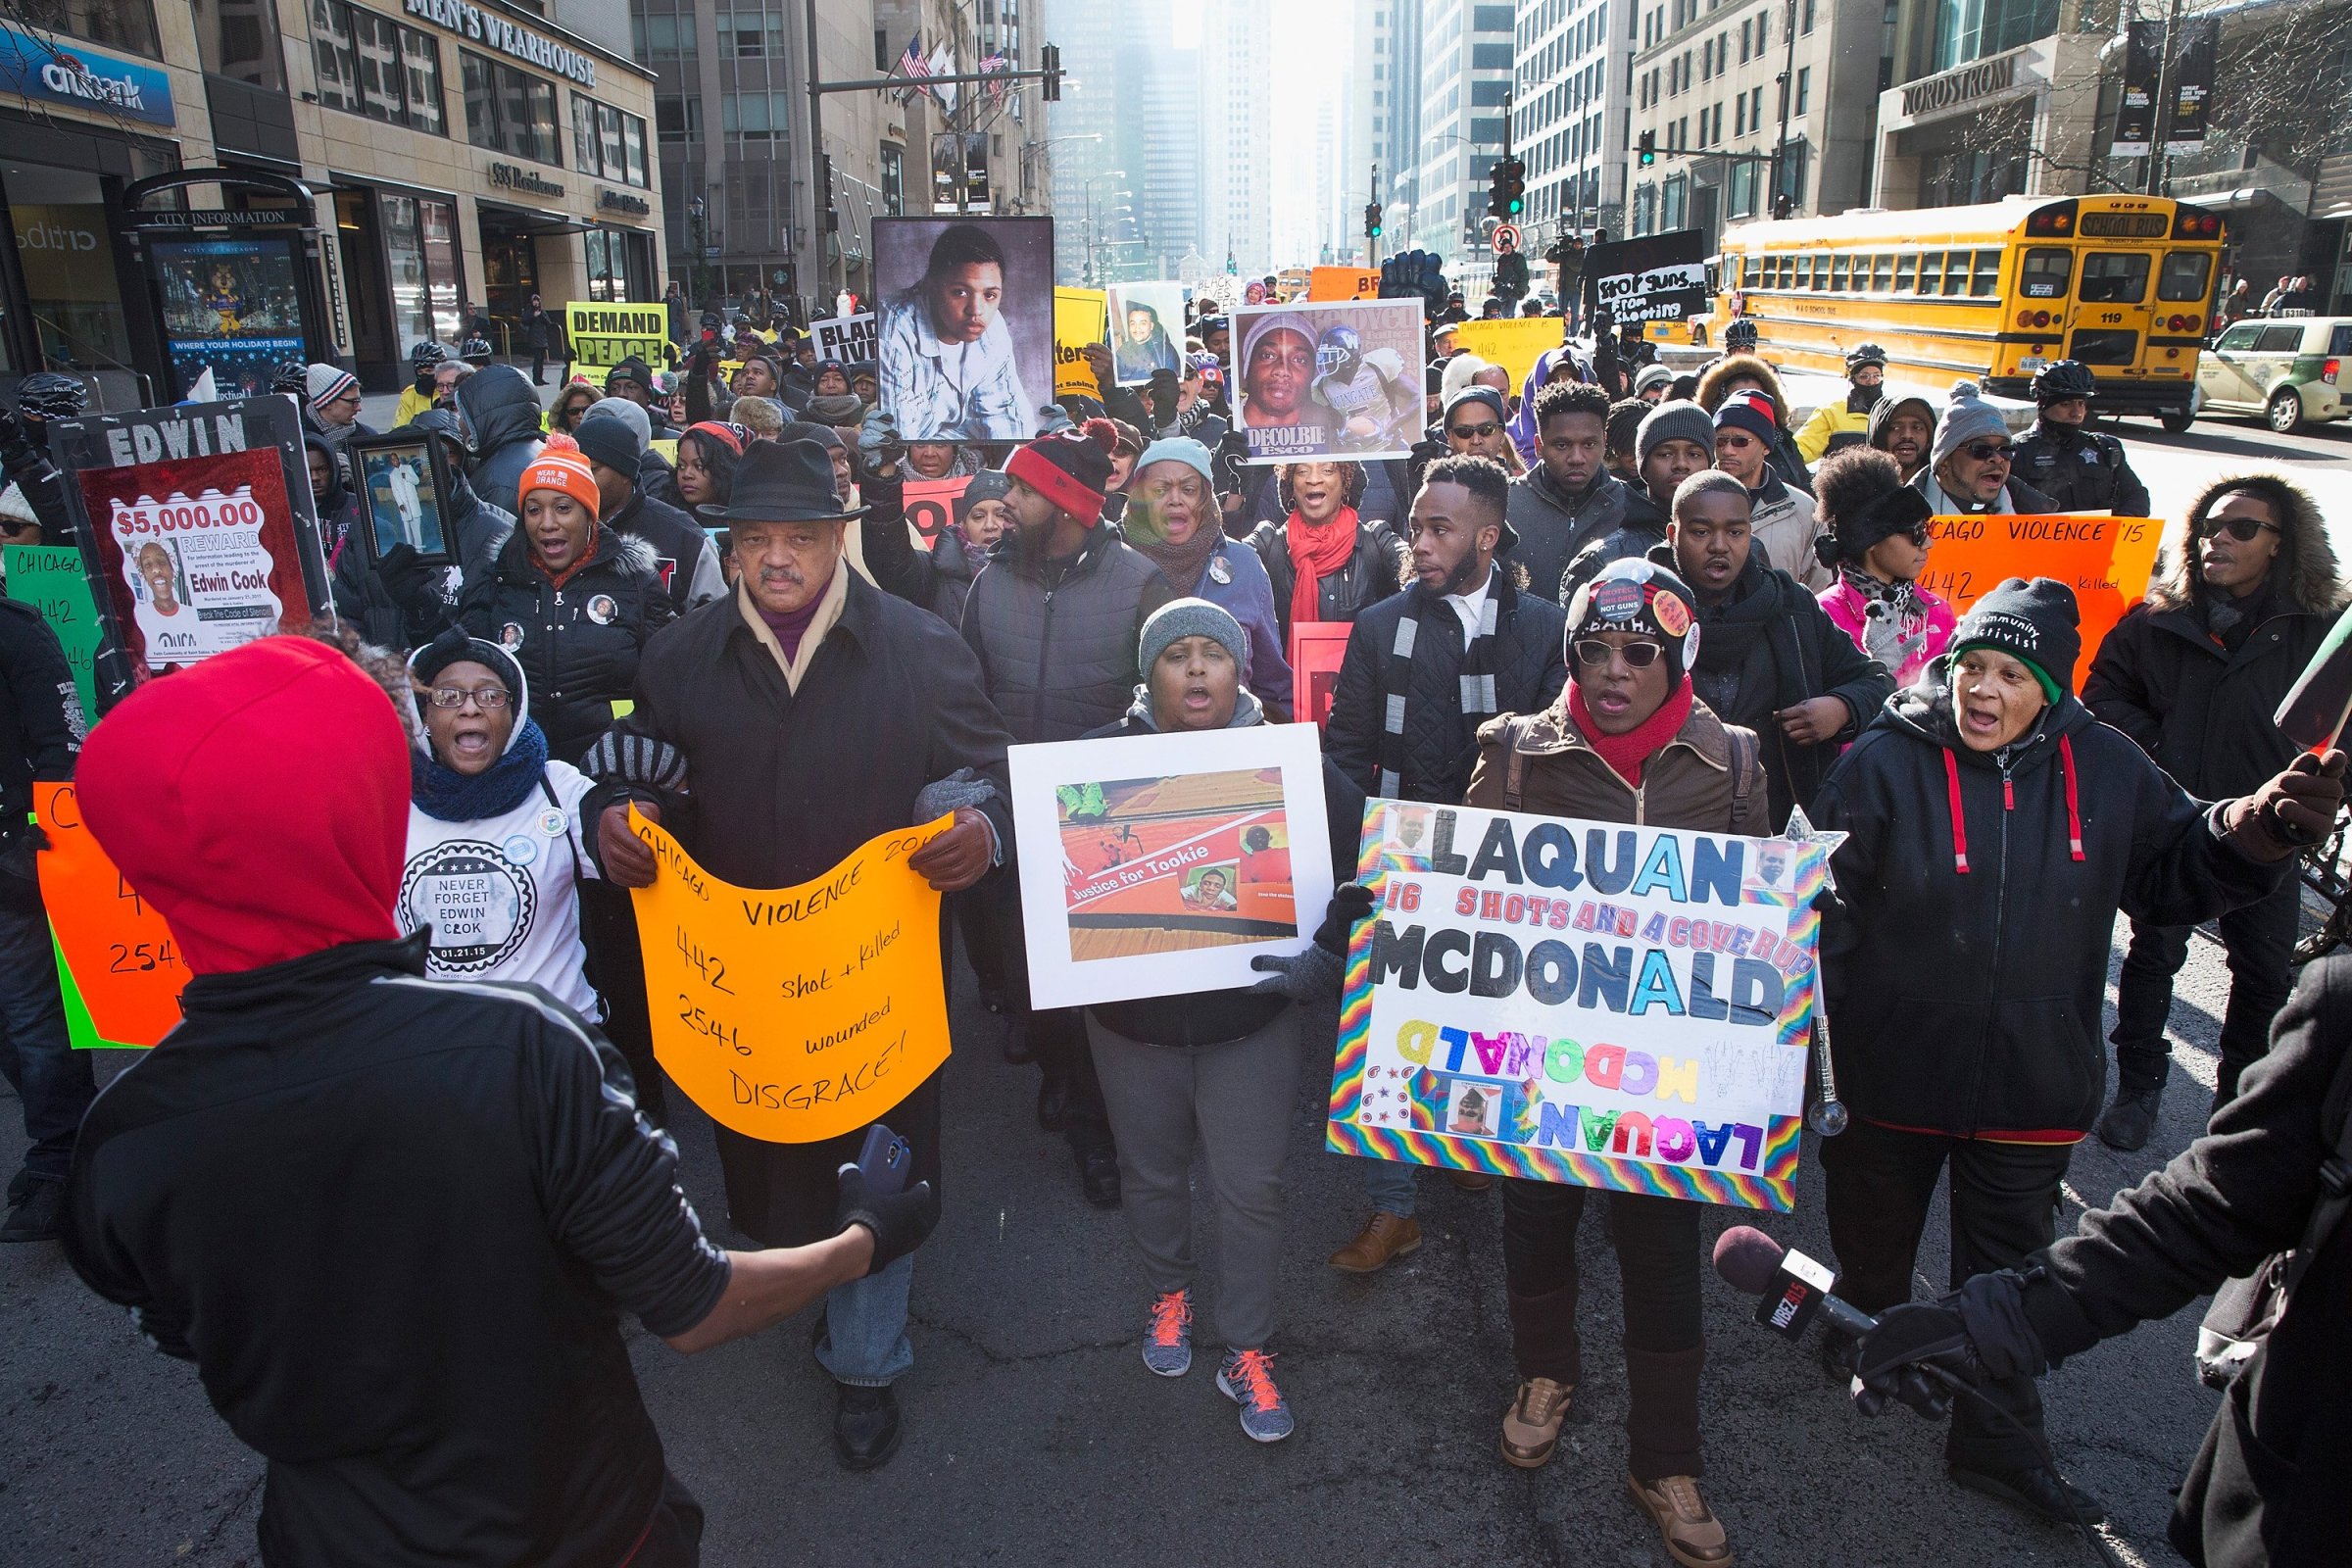 Rev. Jesse Jackson helps to lead demonstrators calling for an end to gun violence as they march through downtown Chicago on Dec. 31, 2015. The shooting deaths by police of a 19-year-old college student Quintonio LeGrier and his 55-year-old neighbor Bettie Jones and a recently released video showing the shooting of 17-year-old Laquan McDonald by Chicago Police officer Jason Van Dyke have sparked dozens of protests in the city.